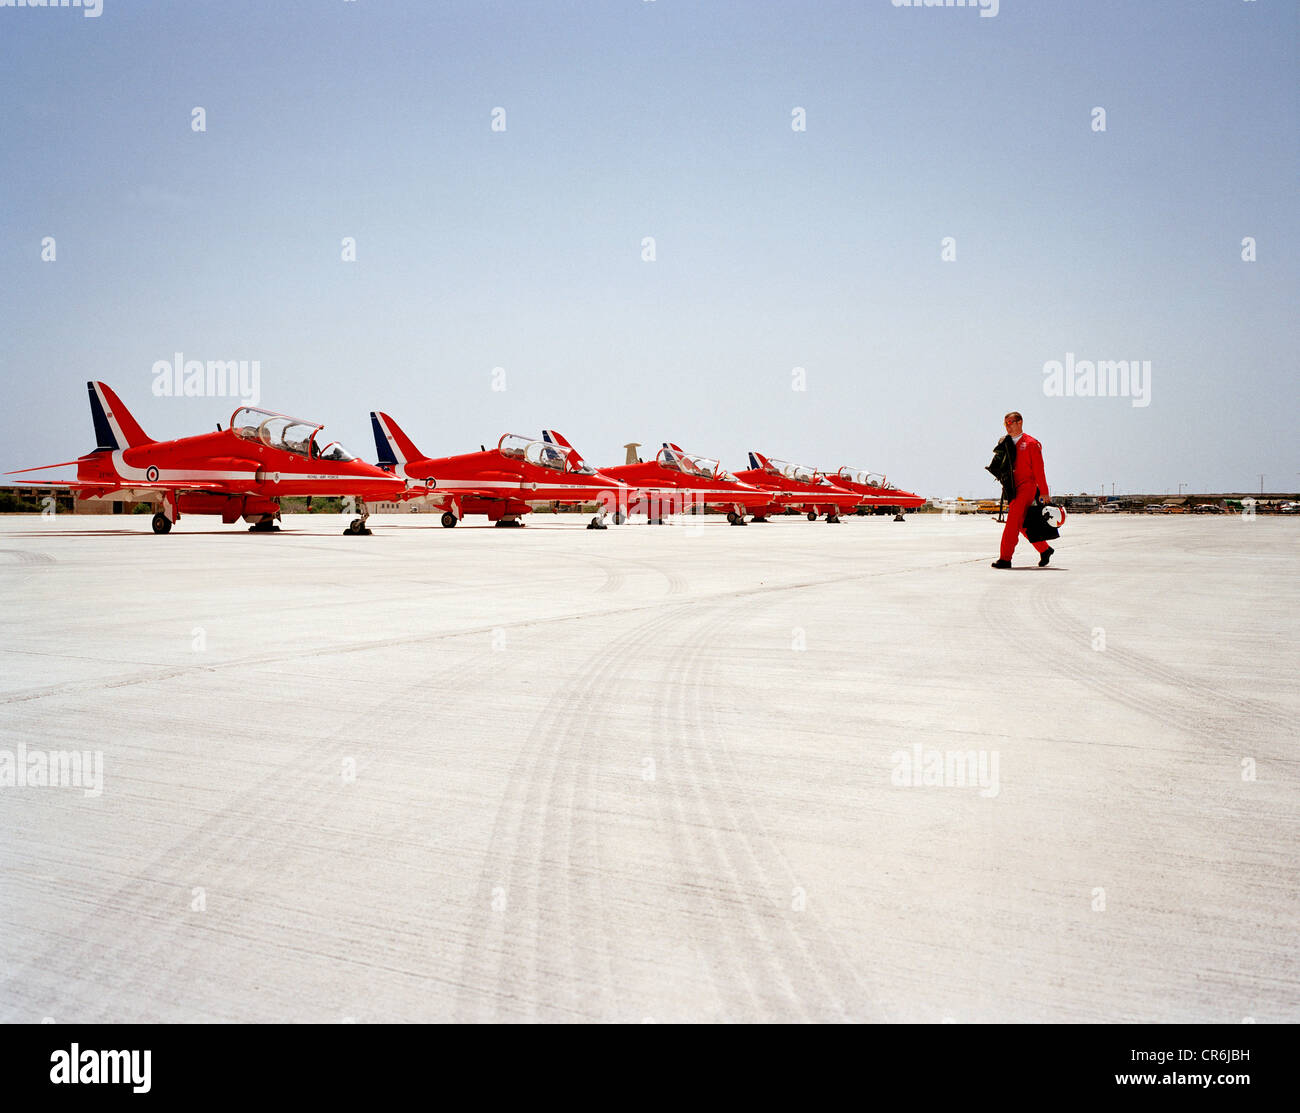 Single pilot of the Red Arrows, Britain's RAF aerobatic team walks out to his Hawk aircraft before a display flight to Jordan. Stock Photo